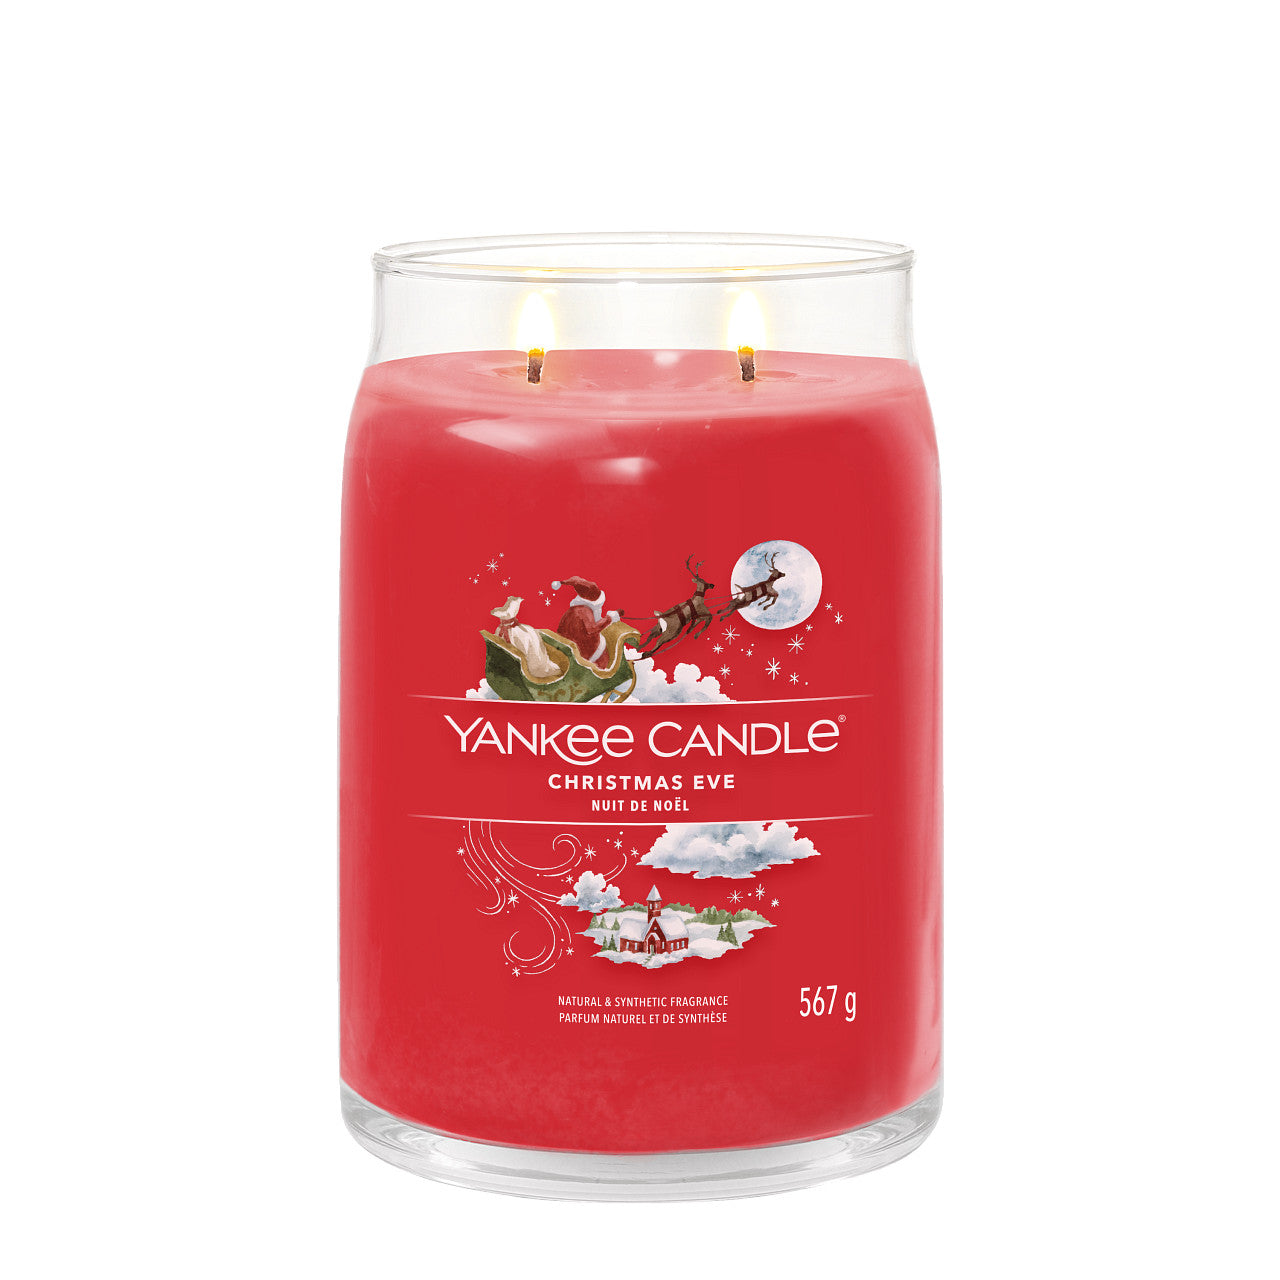 Christmas Eve - Signature Large Jar Scented Candle